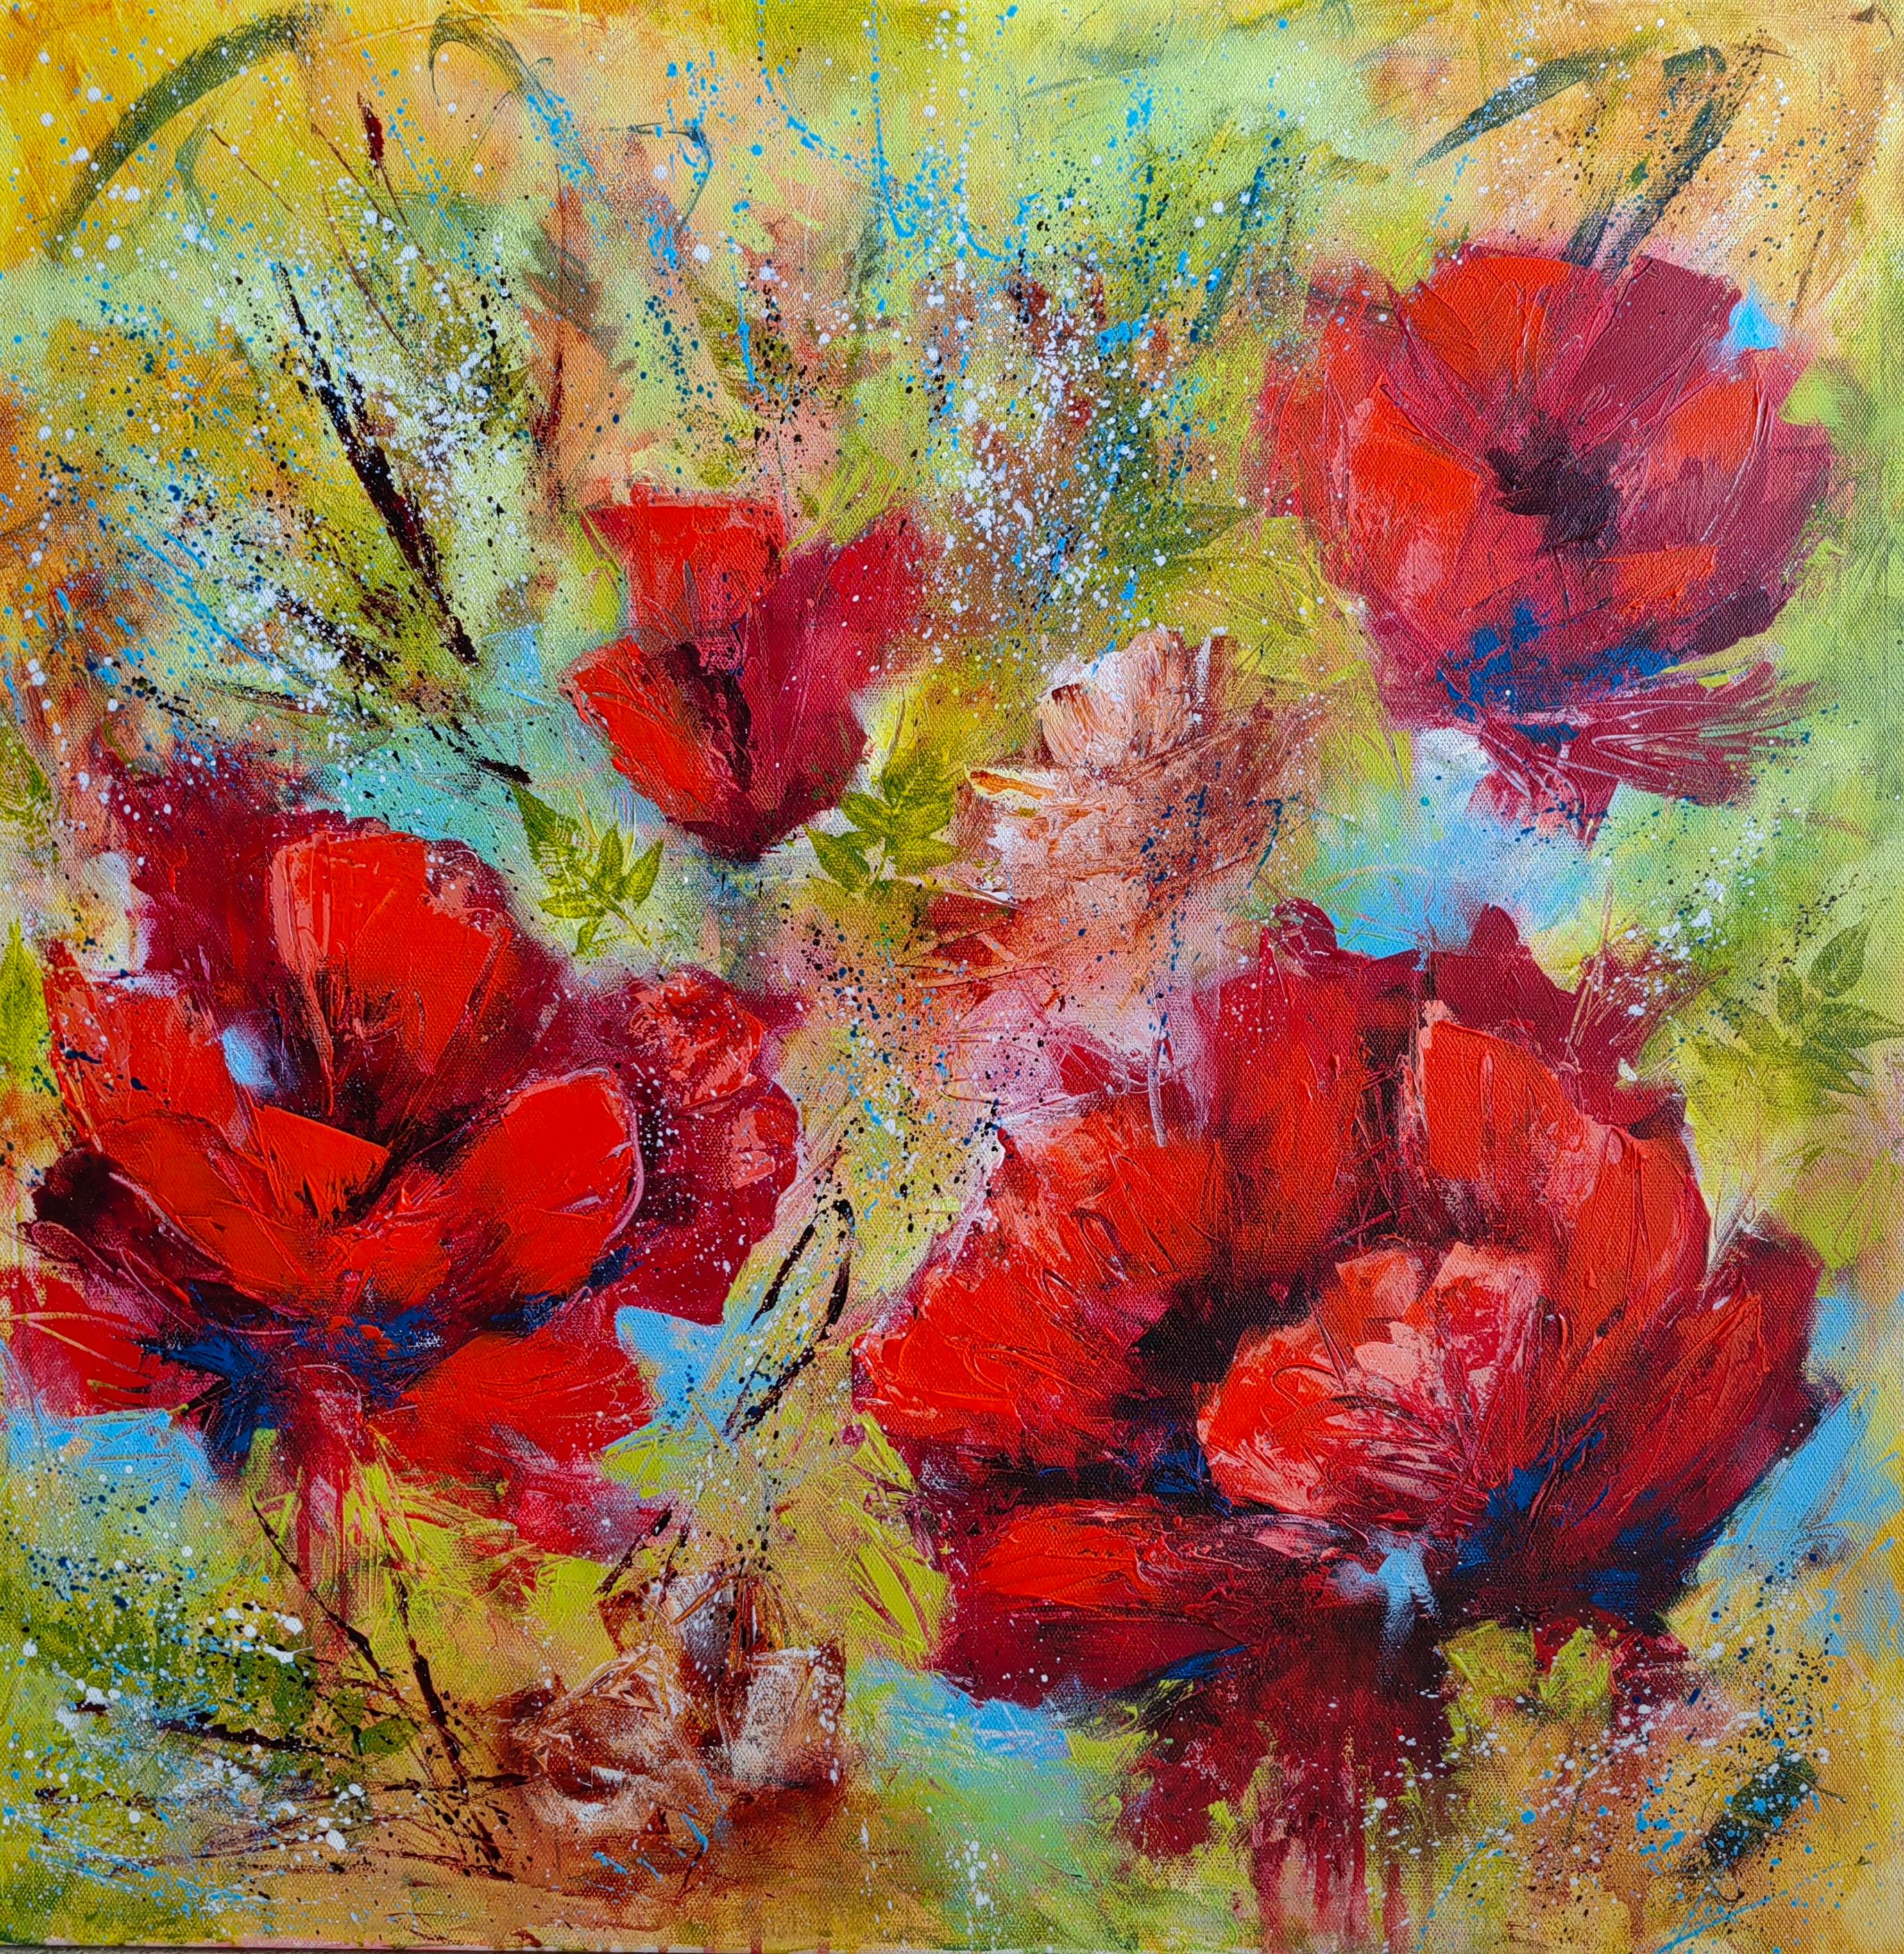 Vera Hoi Interior Painting - "Crimson Dreams: Poppies" from the "Colours of Summer" collection